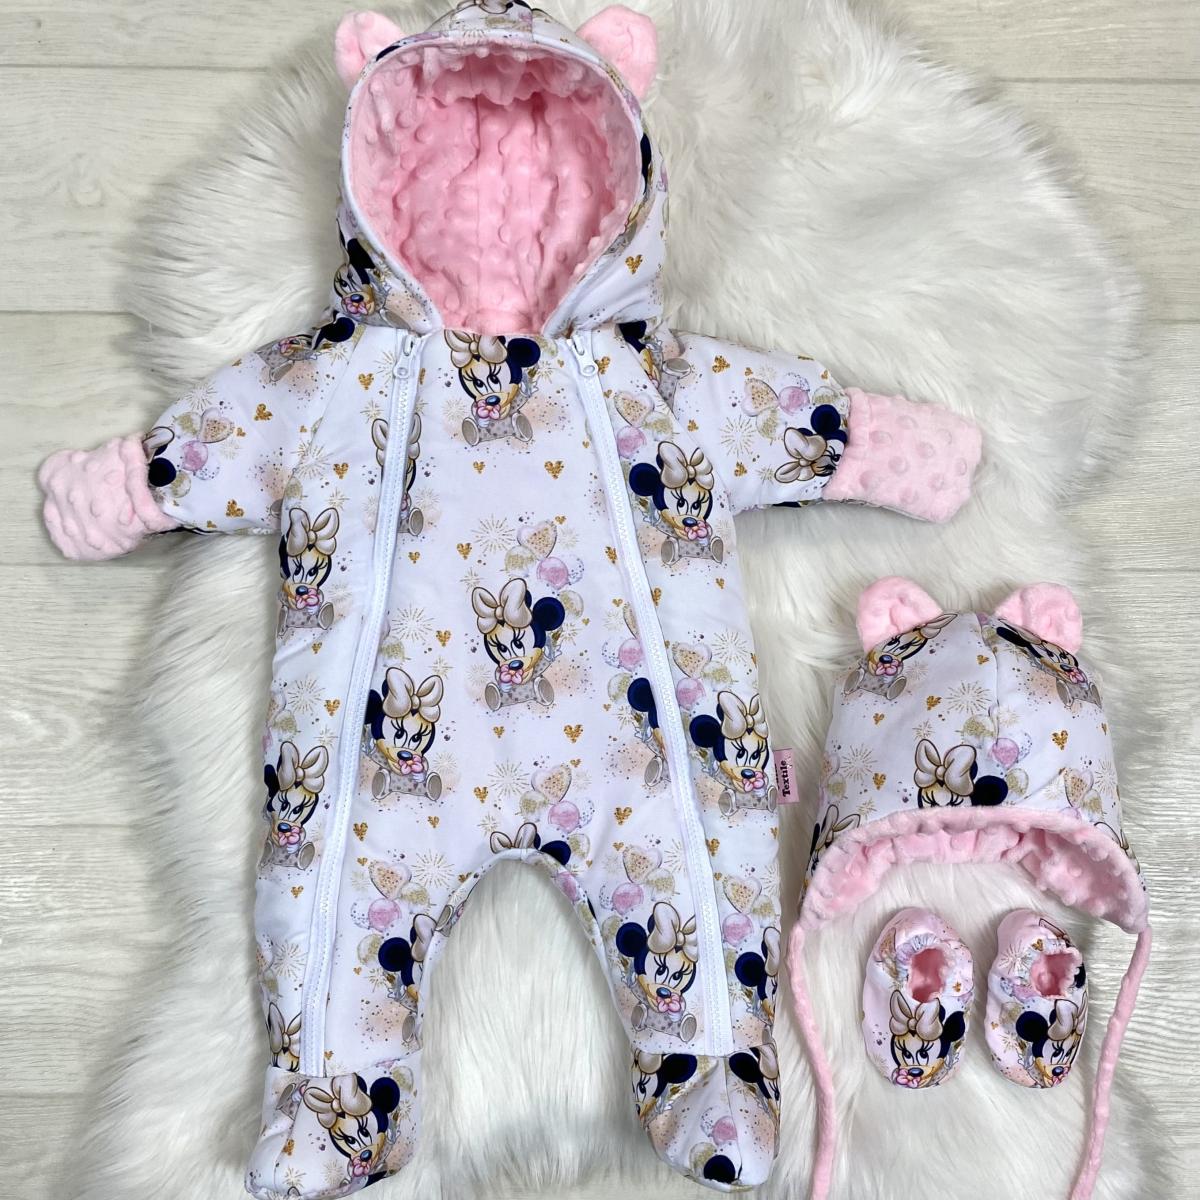 Winter playsuit with the soft pink Minnie print